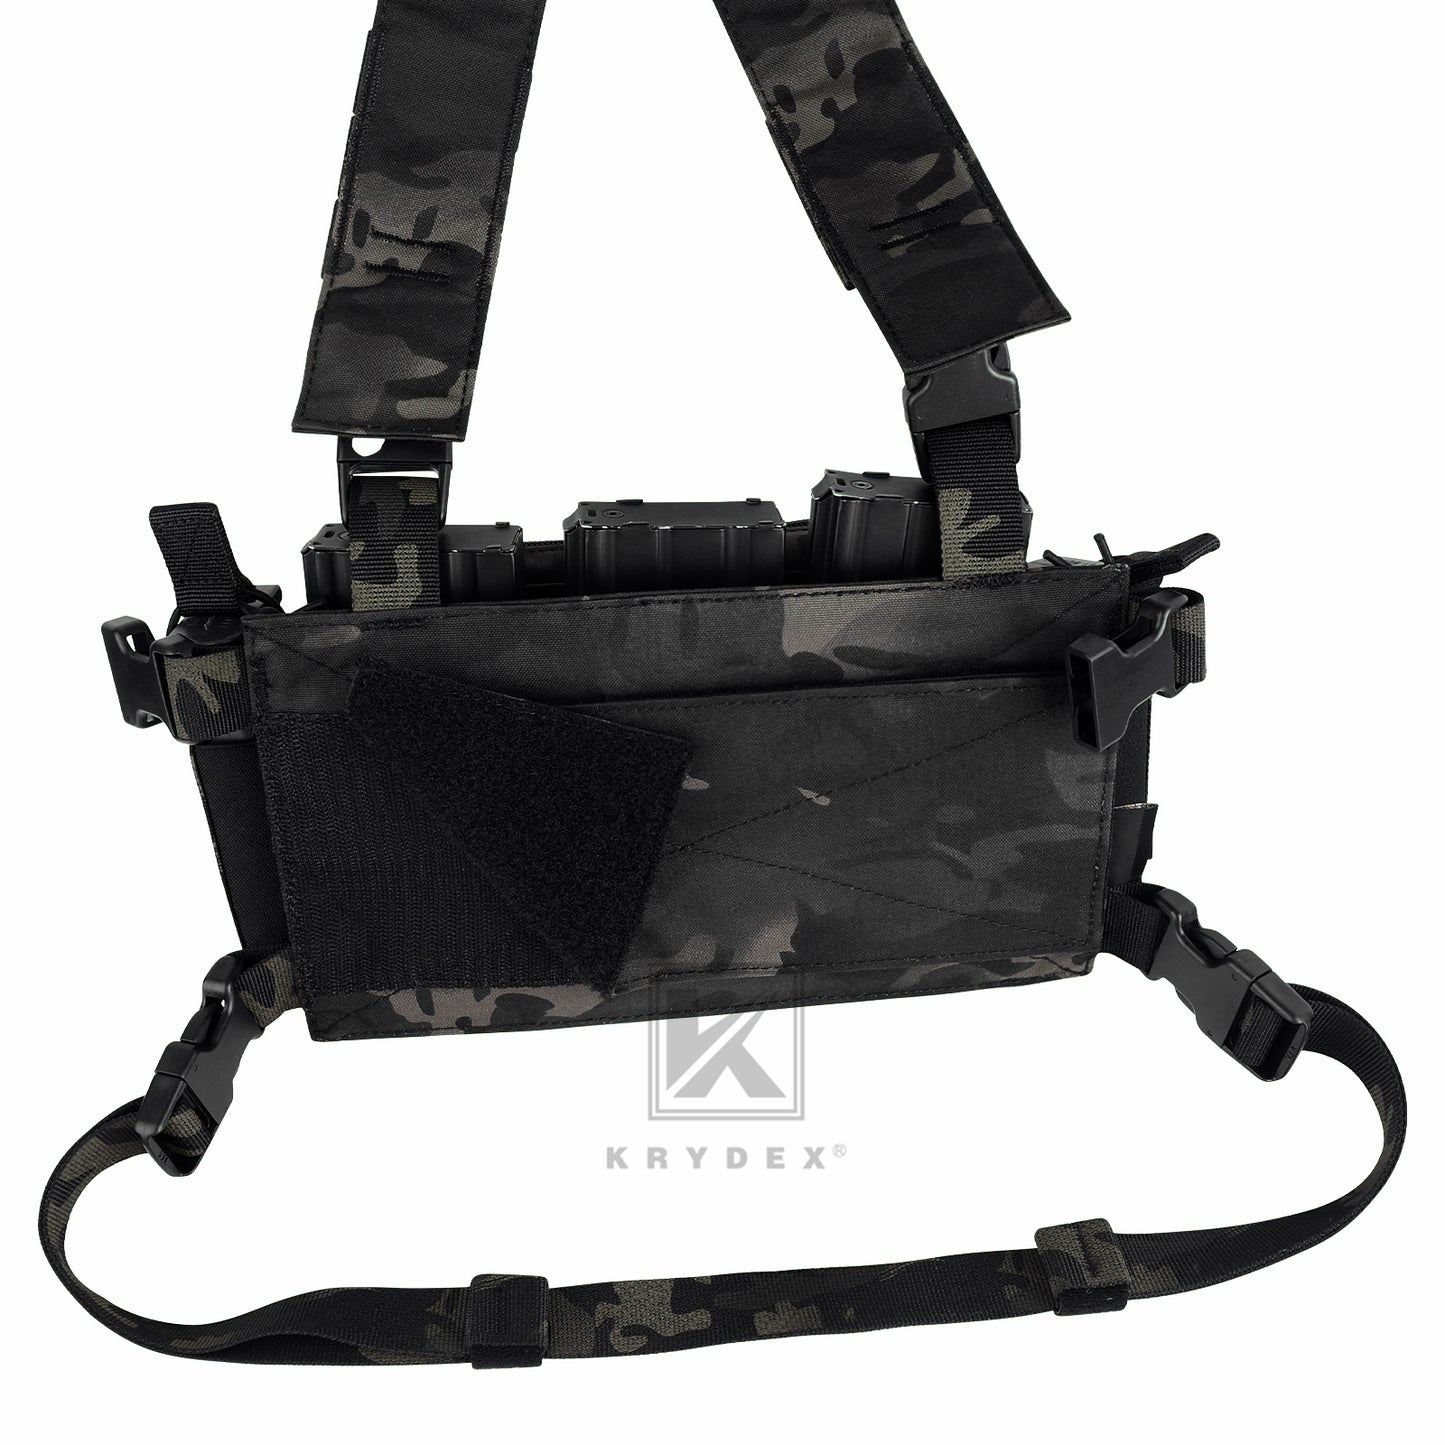 KRYDEX Tactical D3CR Chest Rig 5.56 7.62 Rifle Pistol Mag Pouch Placard Carrier with D3 Flatpack Tactical Backpack